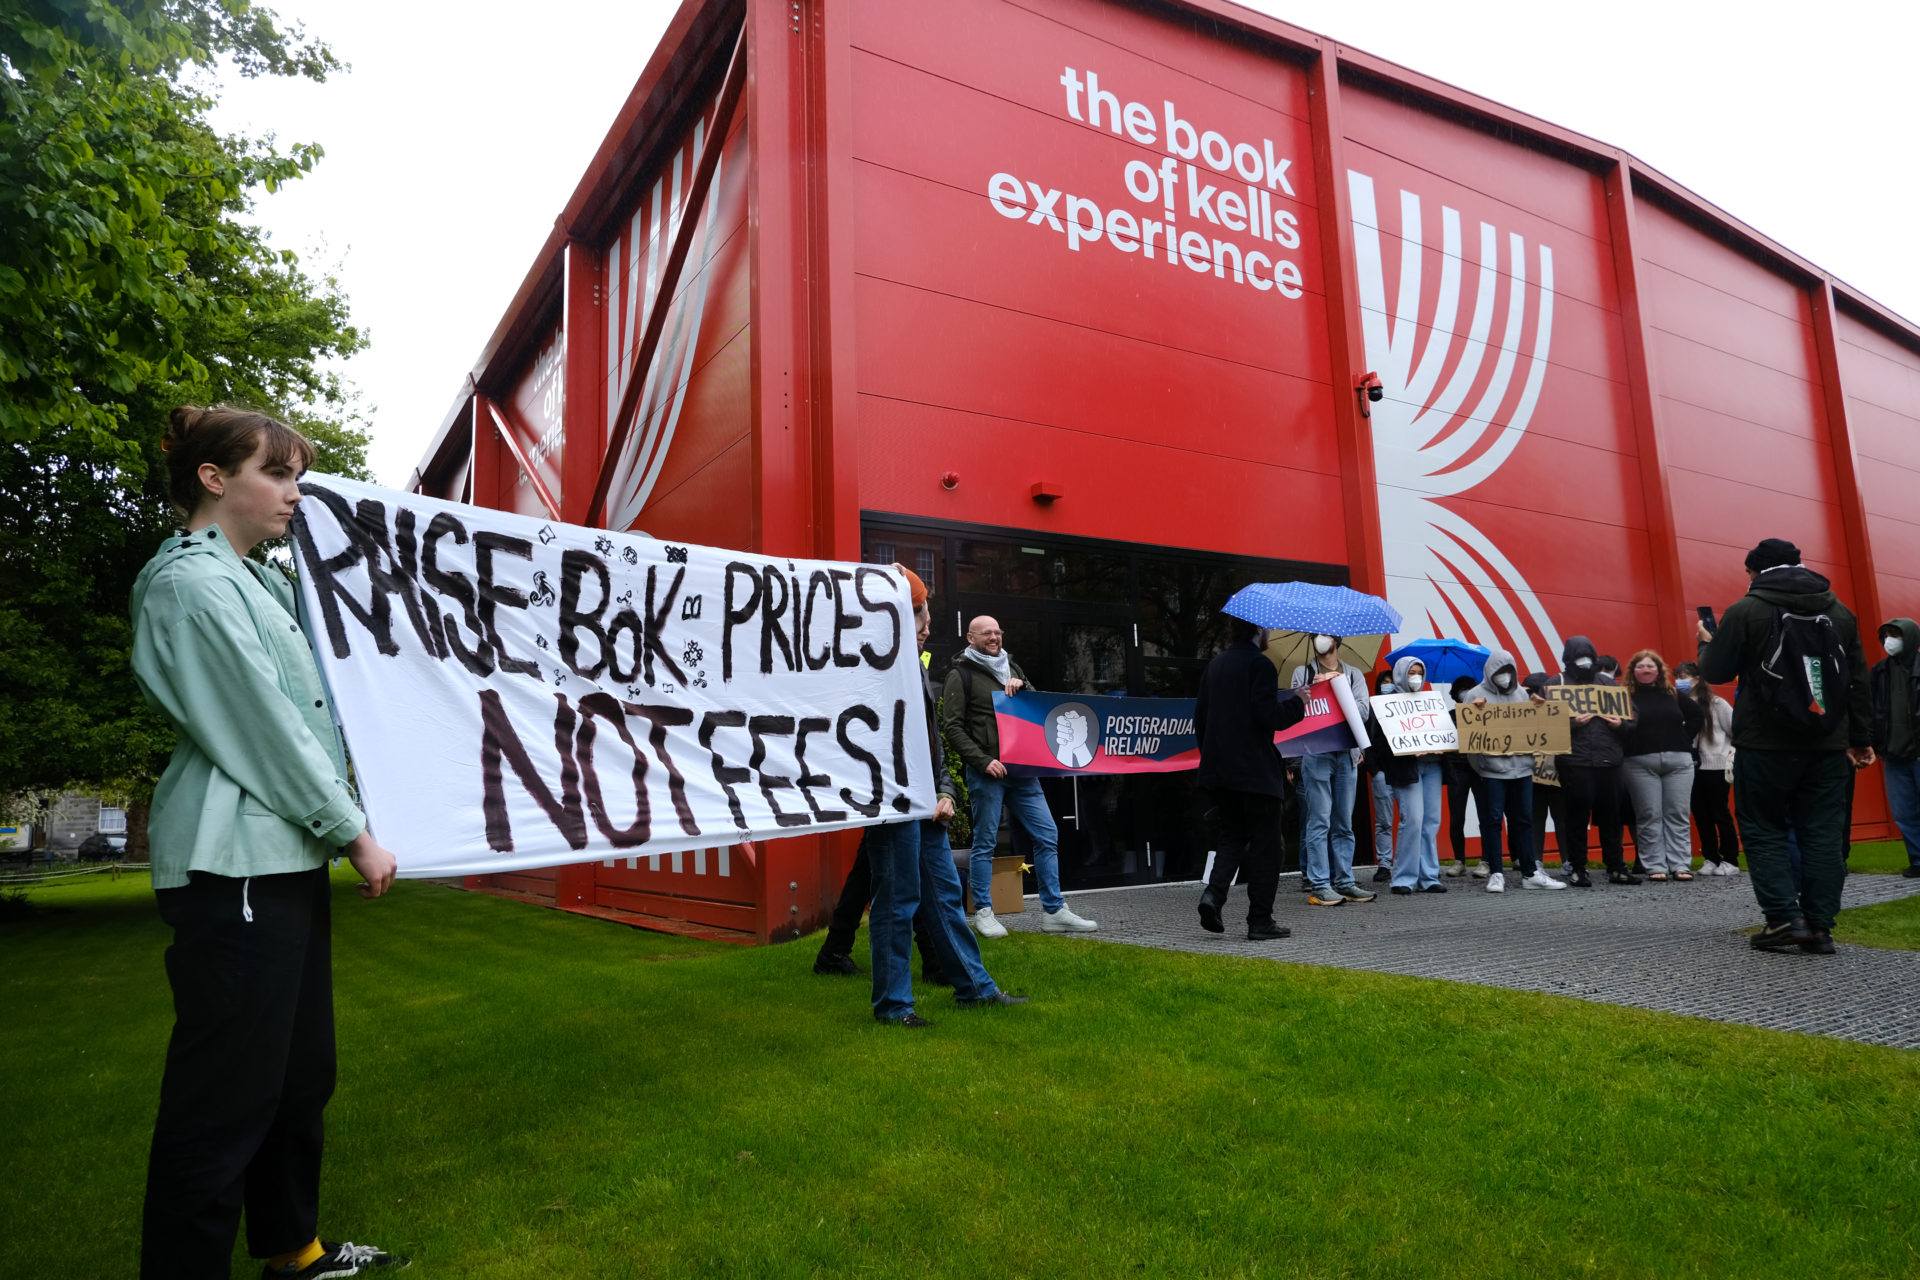 Protestors at the Book of Kells Experience in Trinity College Dublin, 01/05/2024. Image: Rory Chinn/Trinity News